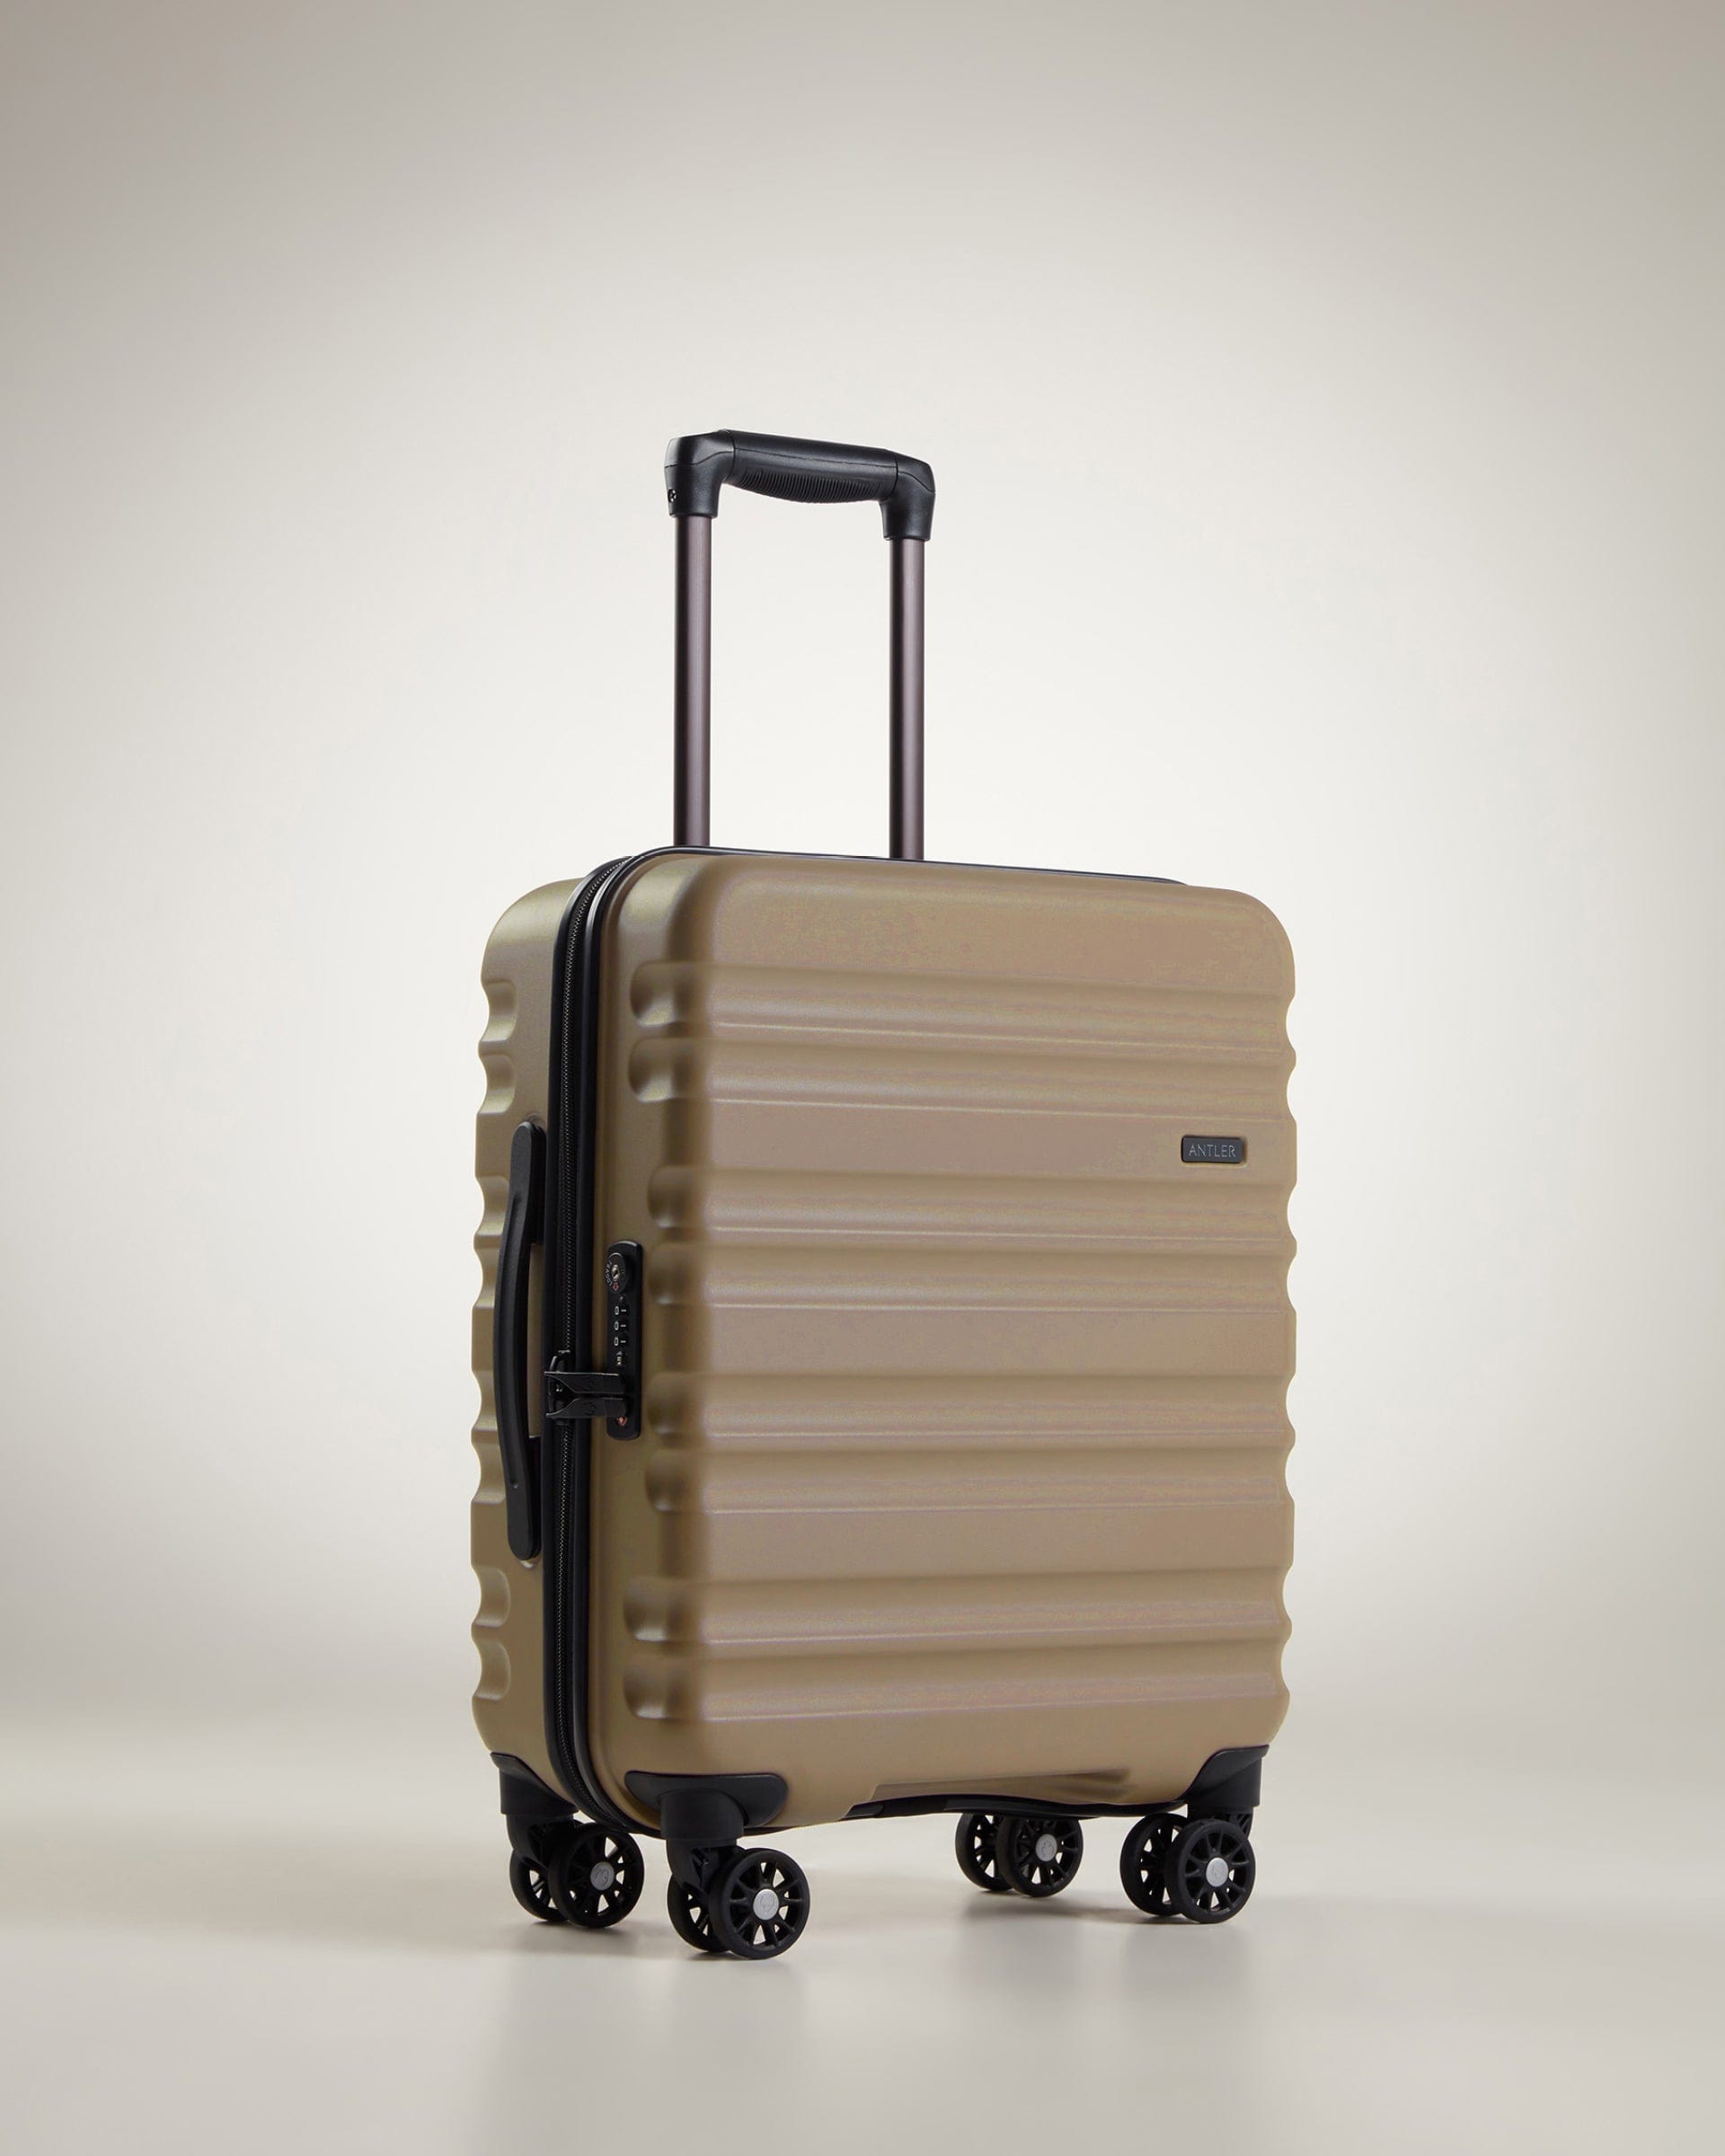 View Antler Clifton Cabin Suitcase In Oak Brown Size 20 x 40 x 55 cm information